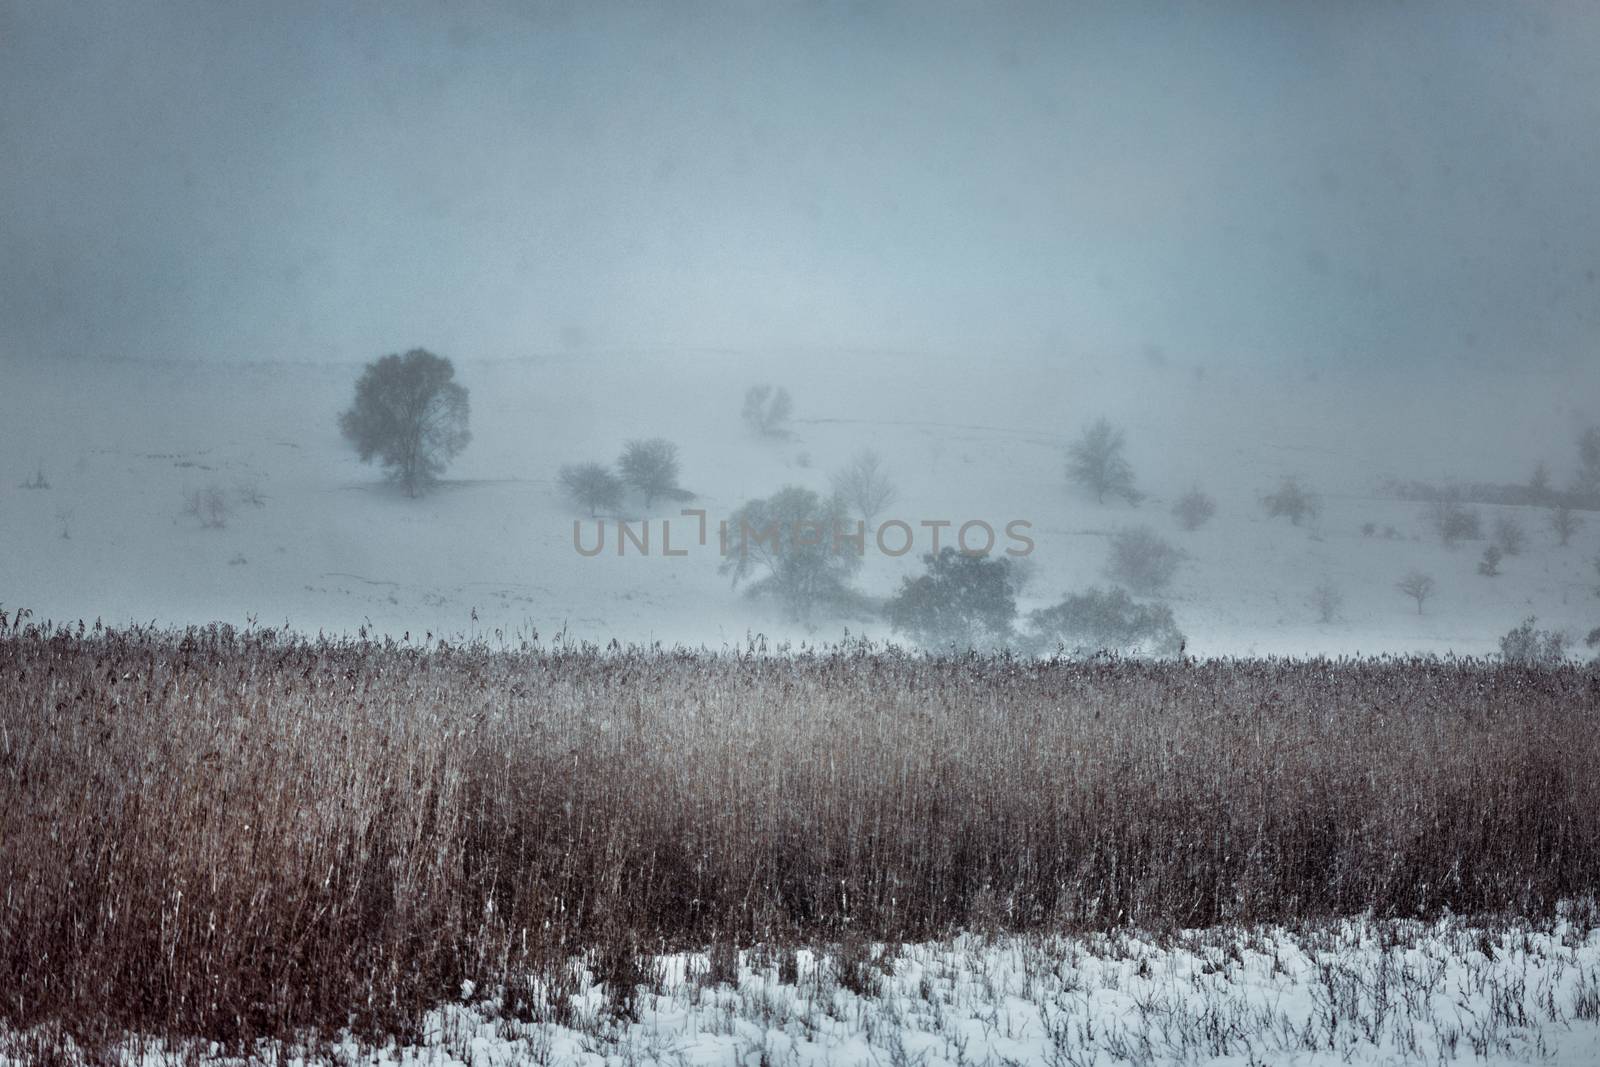 Trees lost in the mist of winter by tadeush89